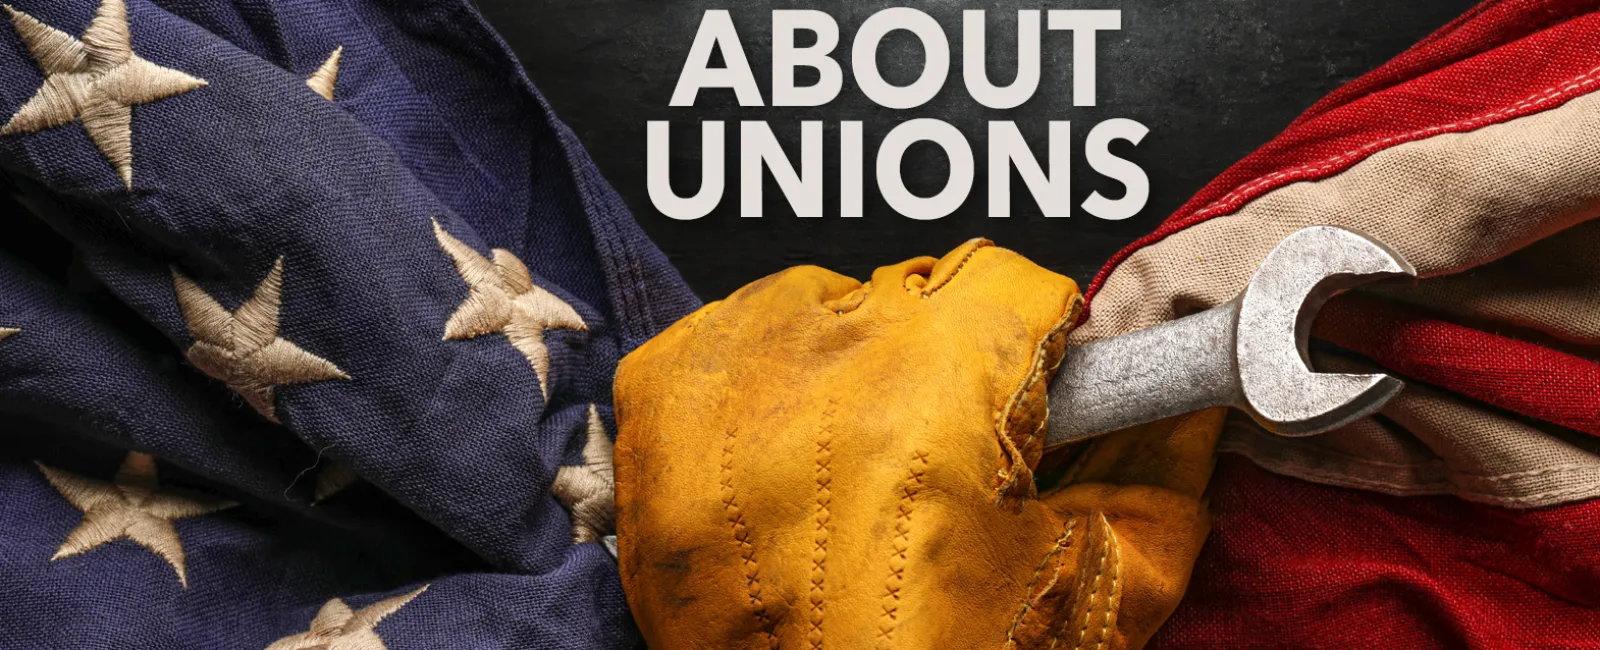 8 Myths About Unions